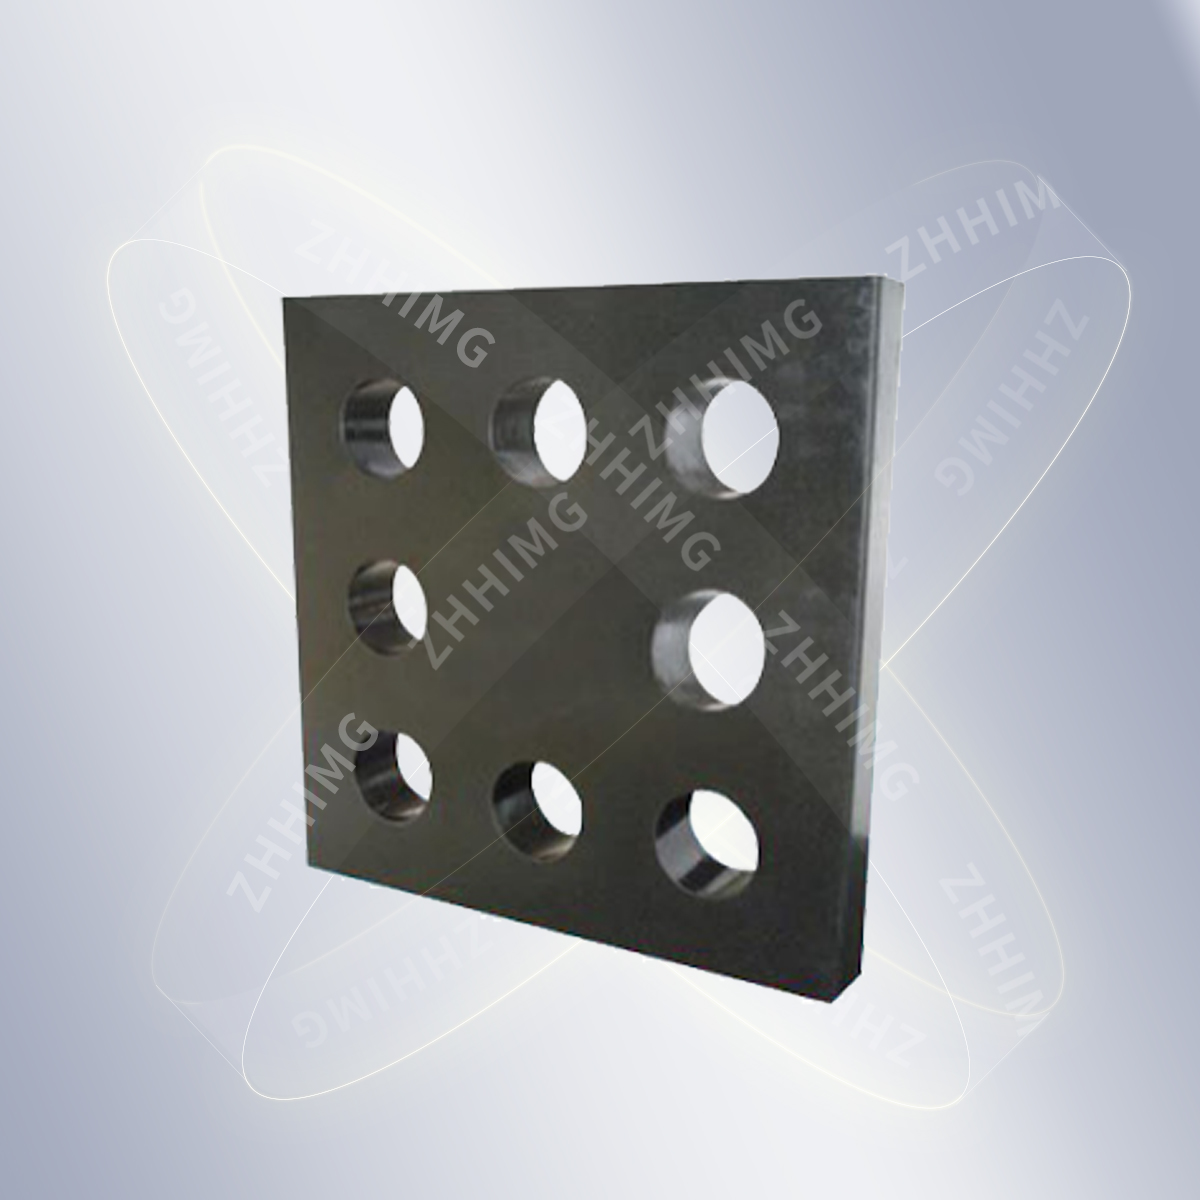 Good User Reputation for Welding Support - Granite Square Ruler with 4 precision surfaces – ZHONGHUI